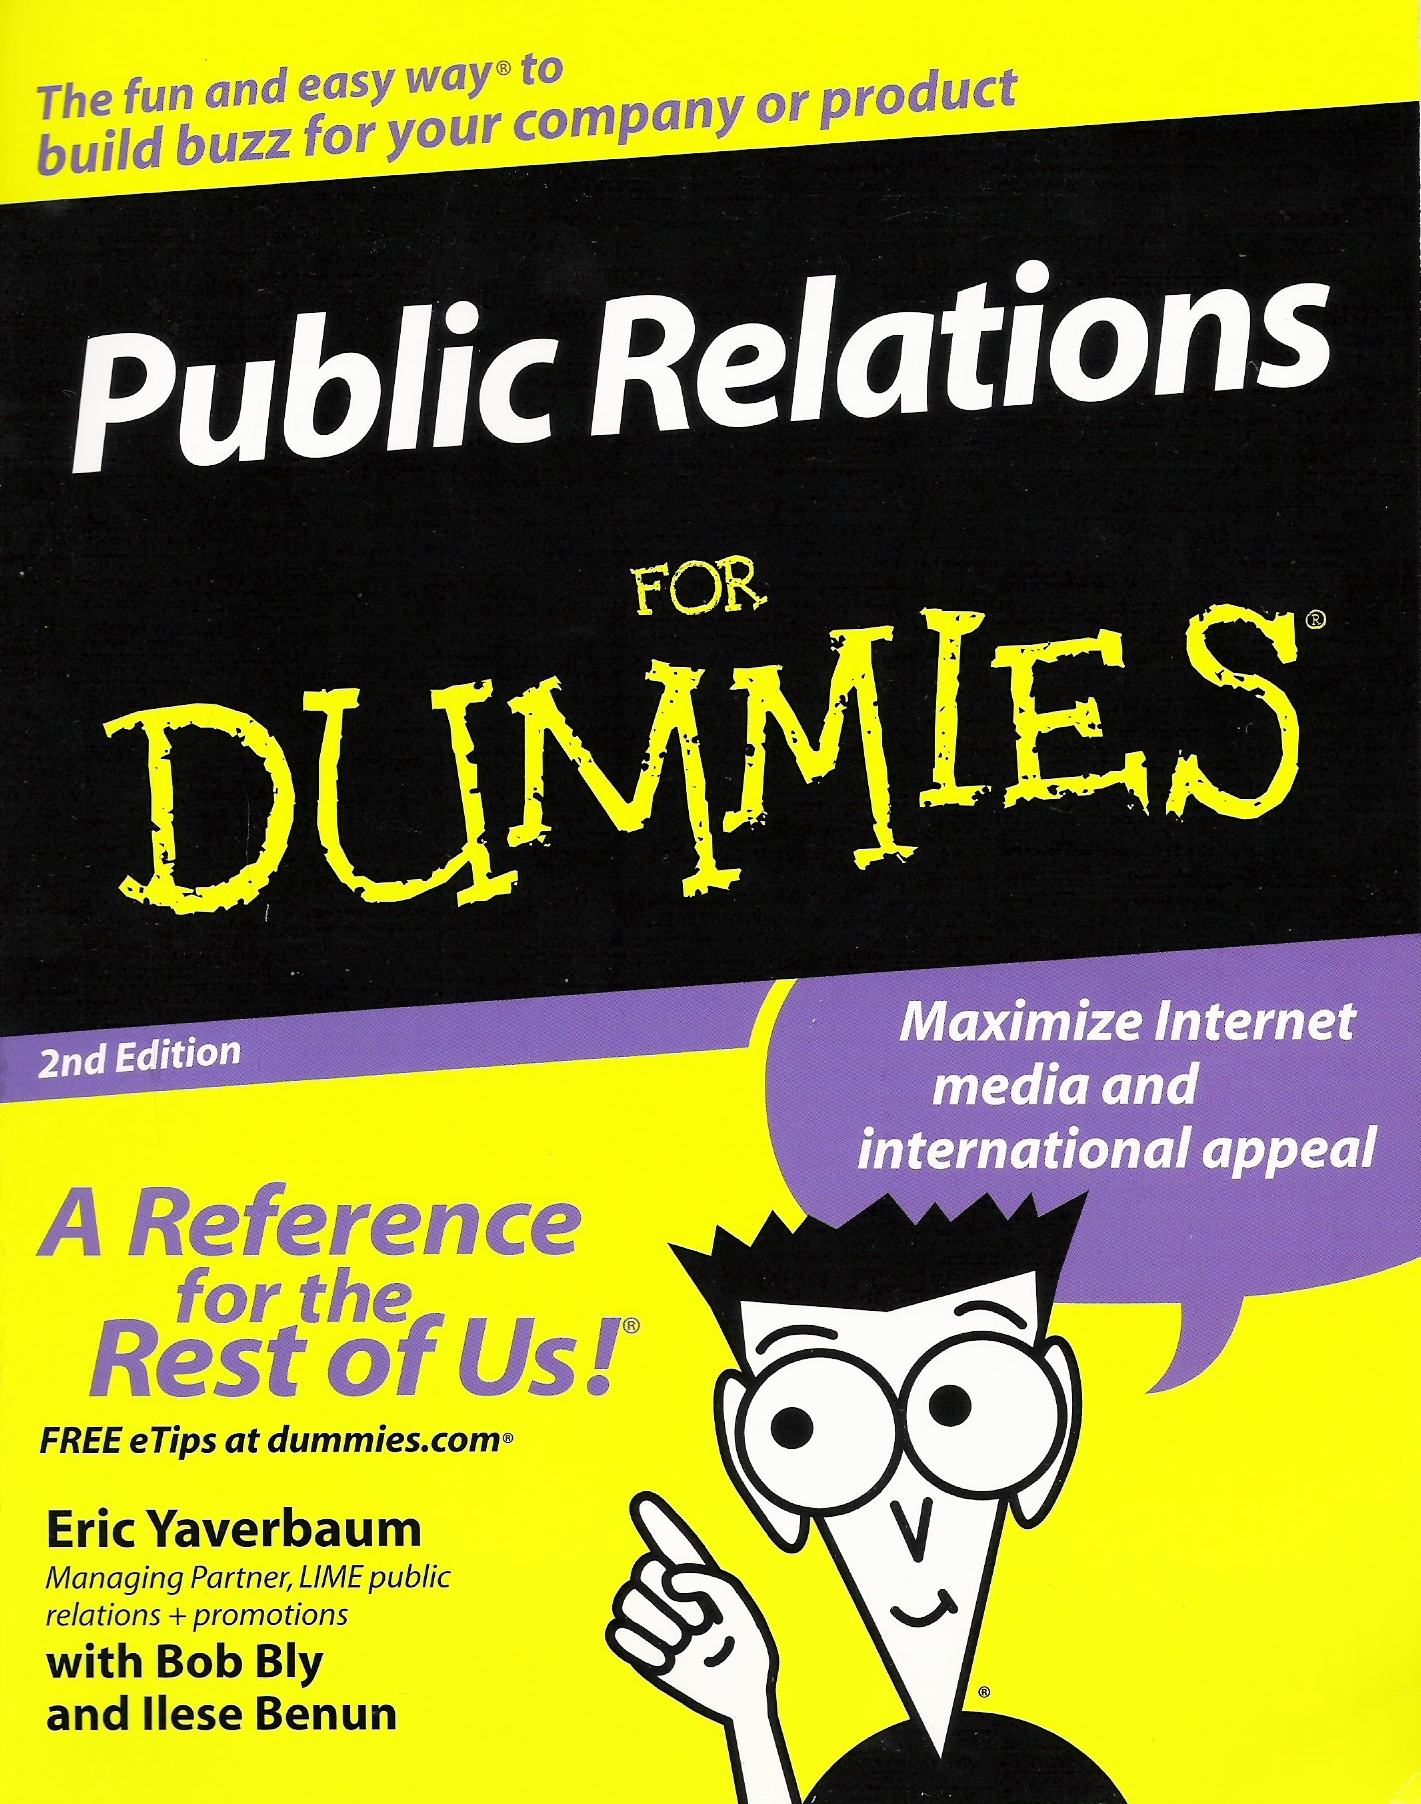 for dummies books re-creation